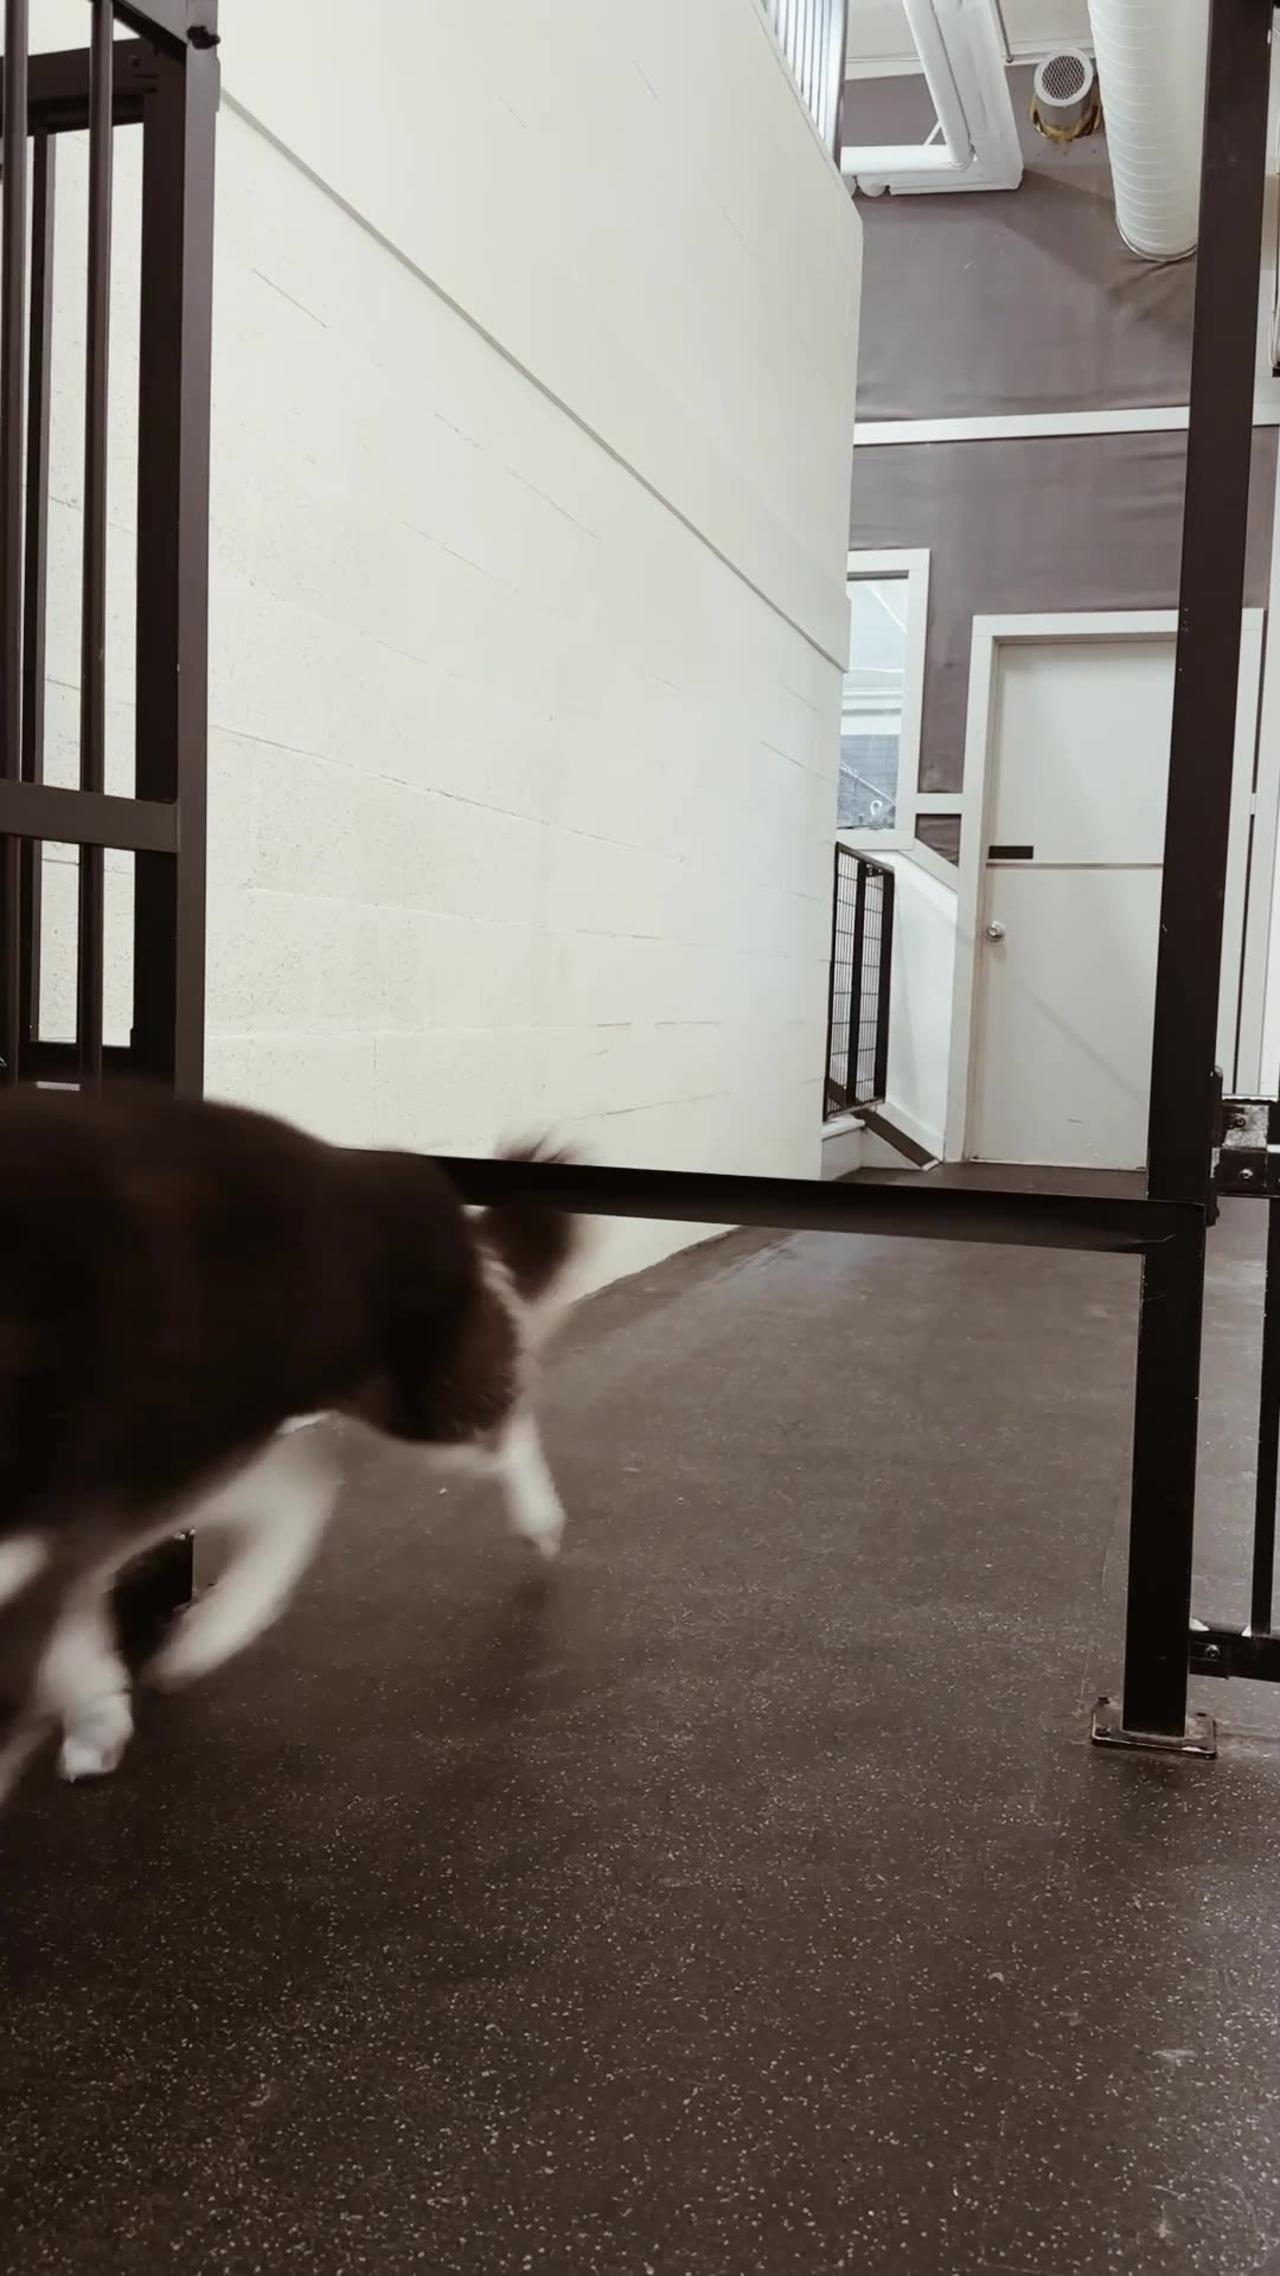 Testing the Athleticism of Doggy Daycare Pups